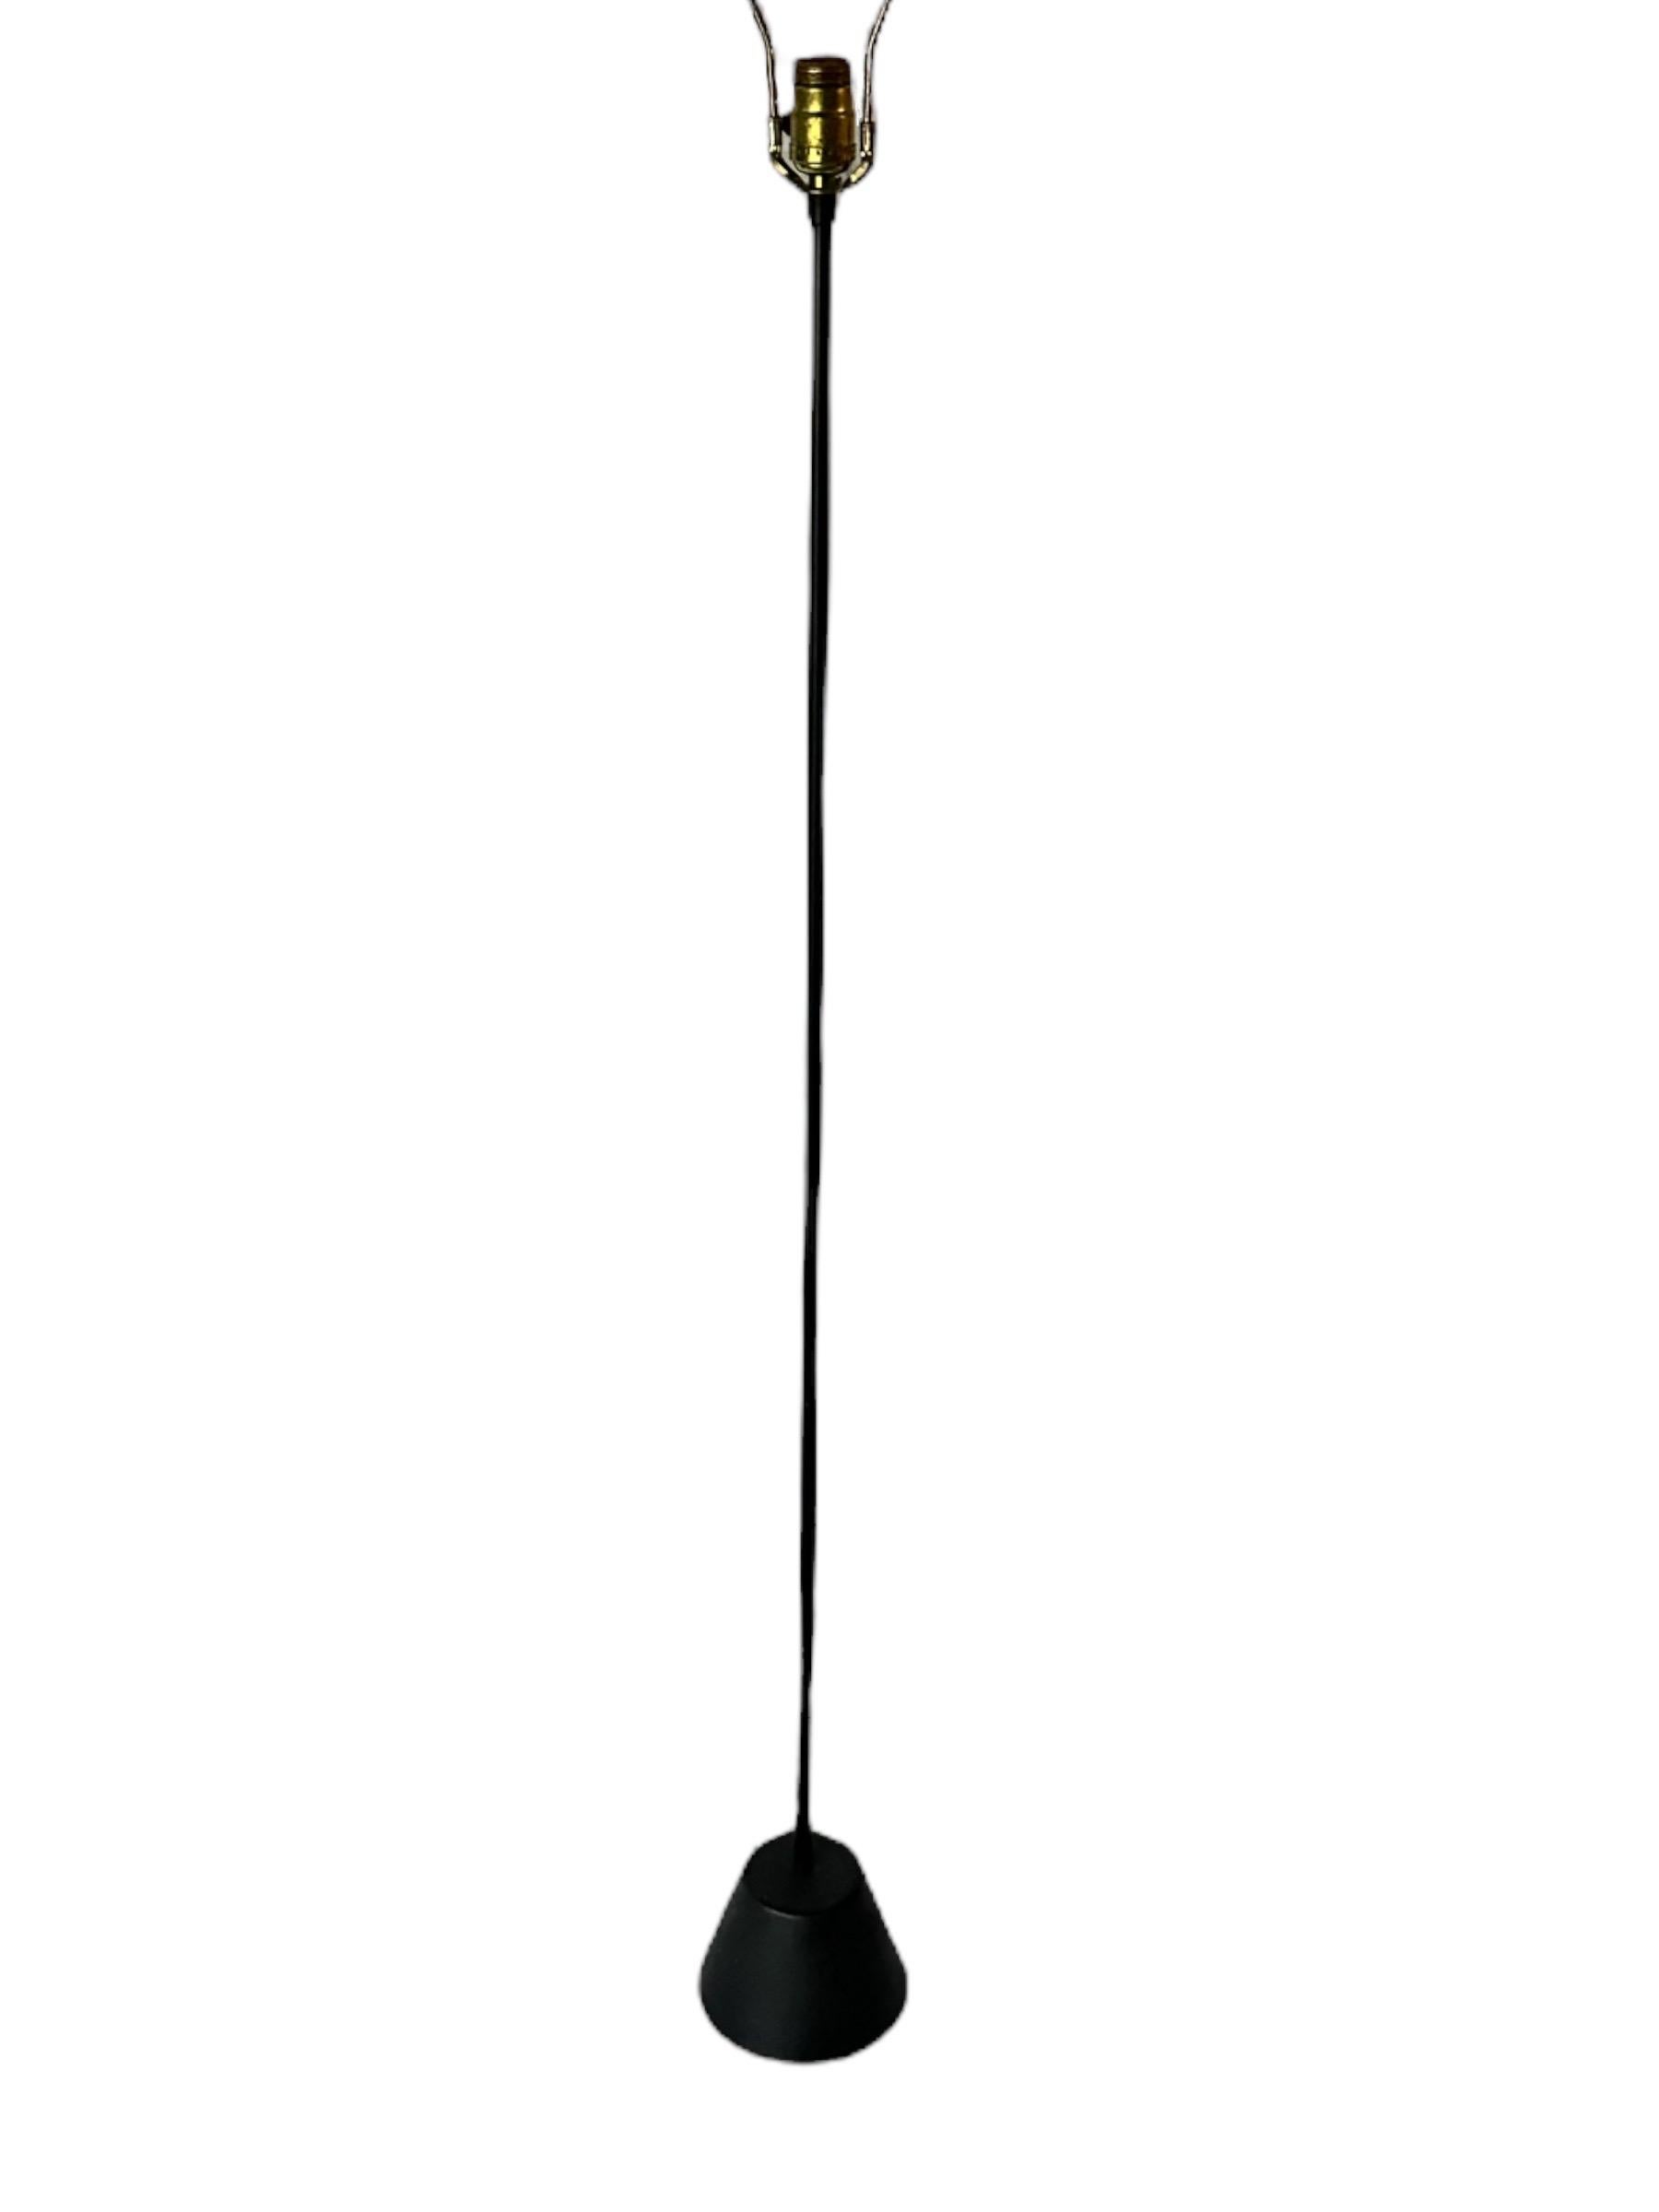 Elegant minimalist black floor lamp. Thin metal pole anchored by heavy and chic tapered base. Shade available for additional $99. We also have a second one available in yellow.